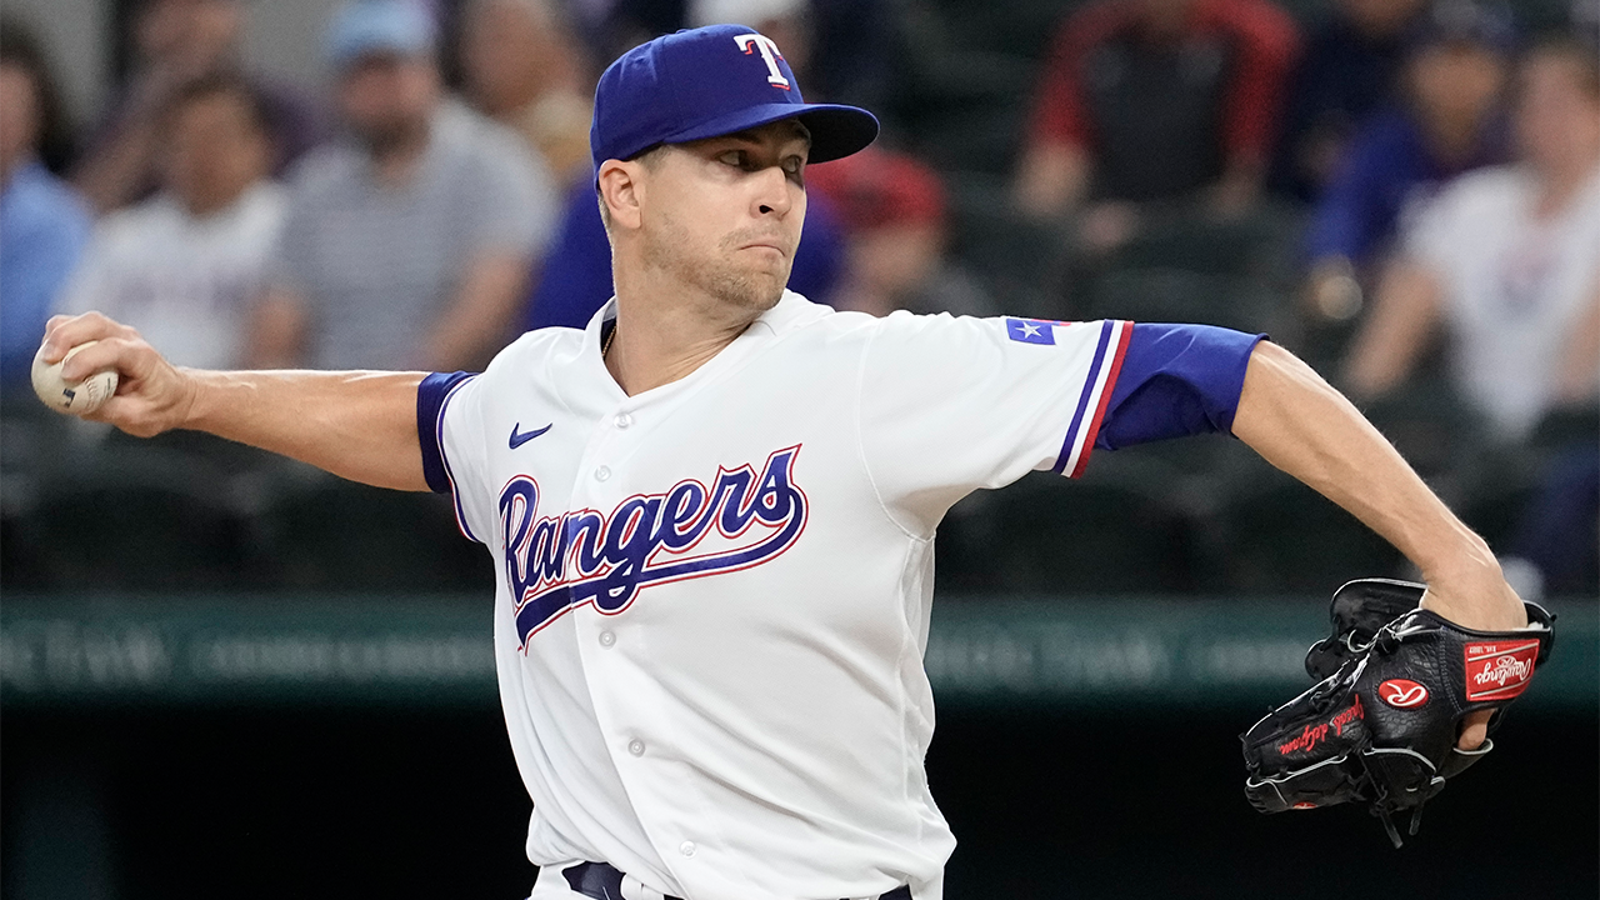 Jacob deGrom strikes out 11 in Rangers' 5-2 victory over the Orioles